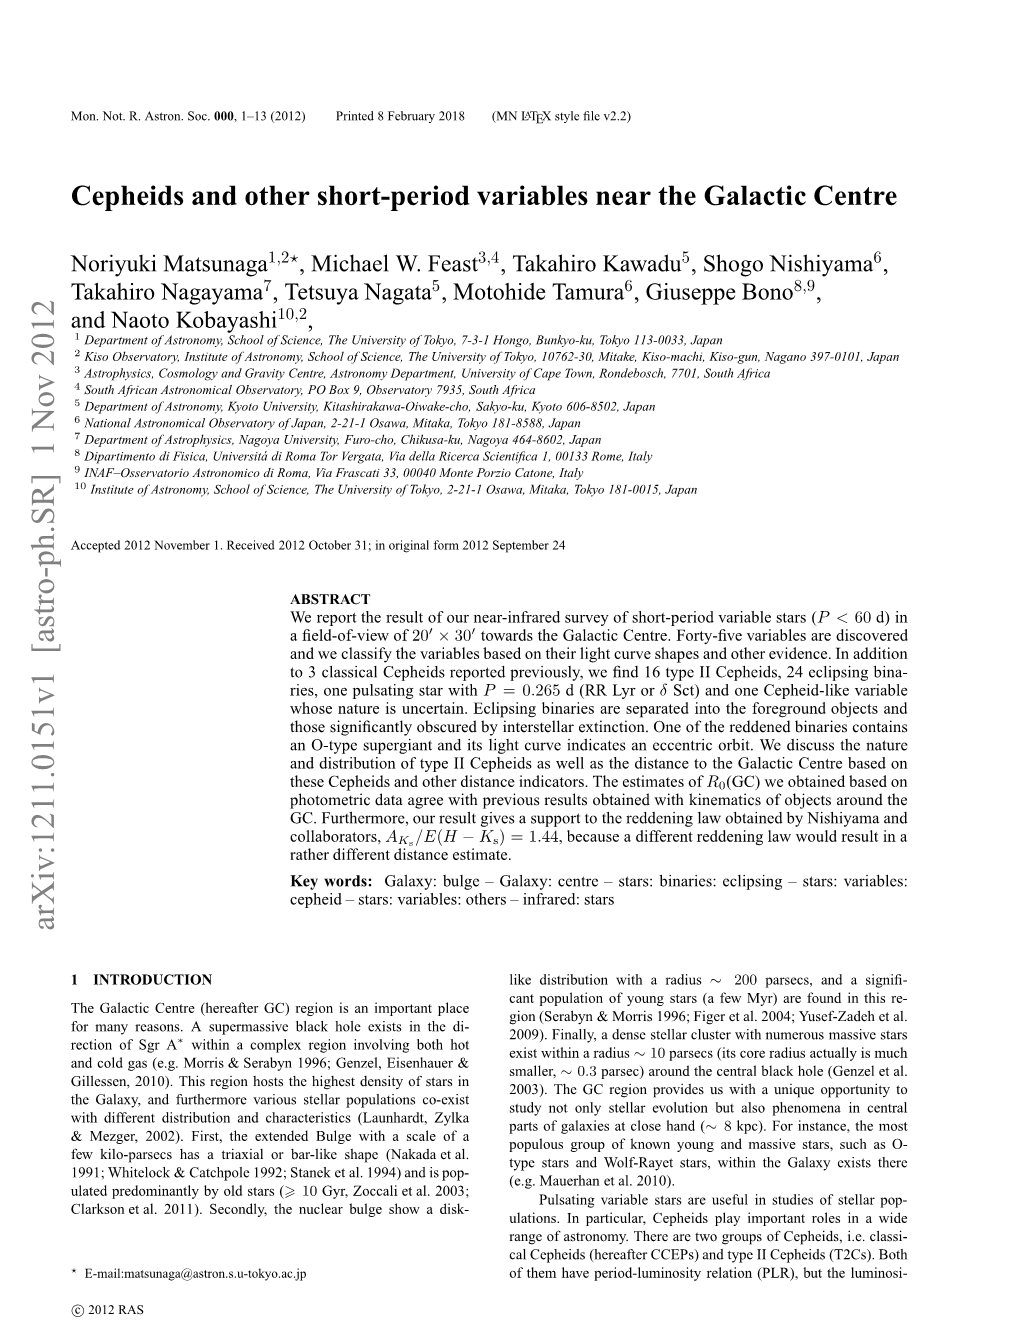 Cepheids and Other Short-Period Variables Near the Galactic Centre